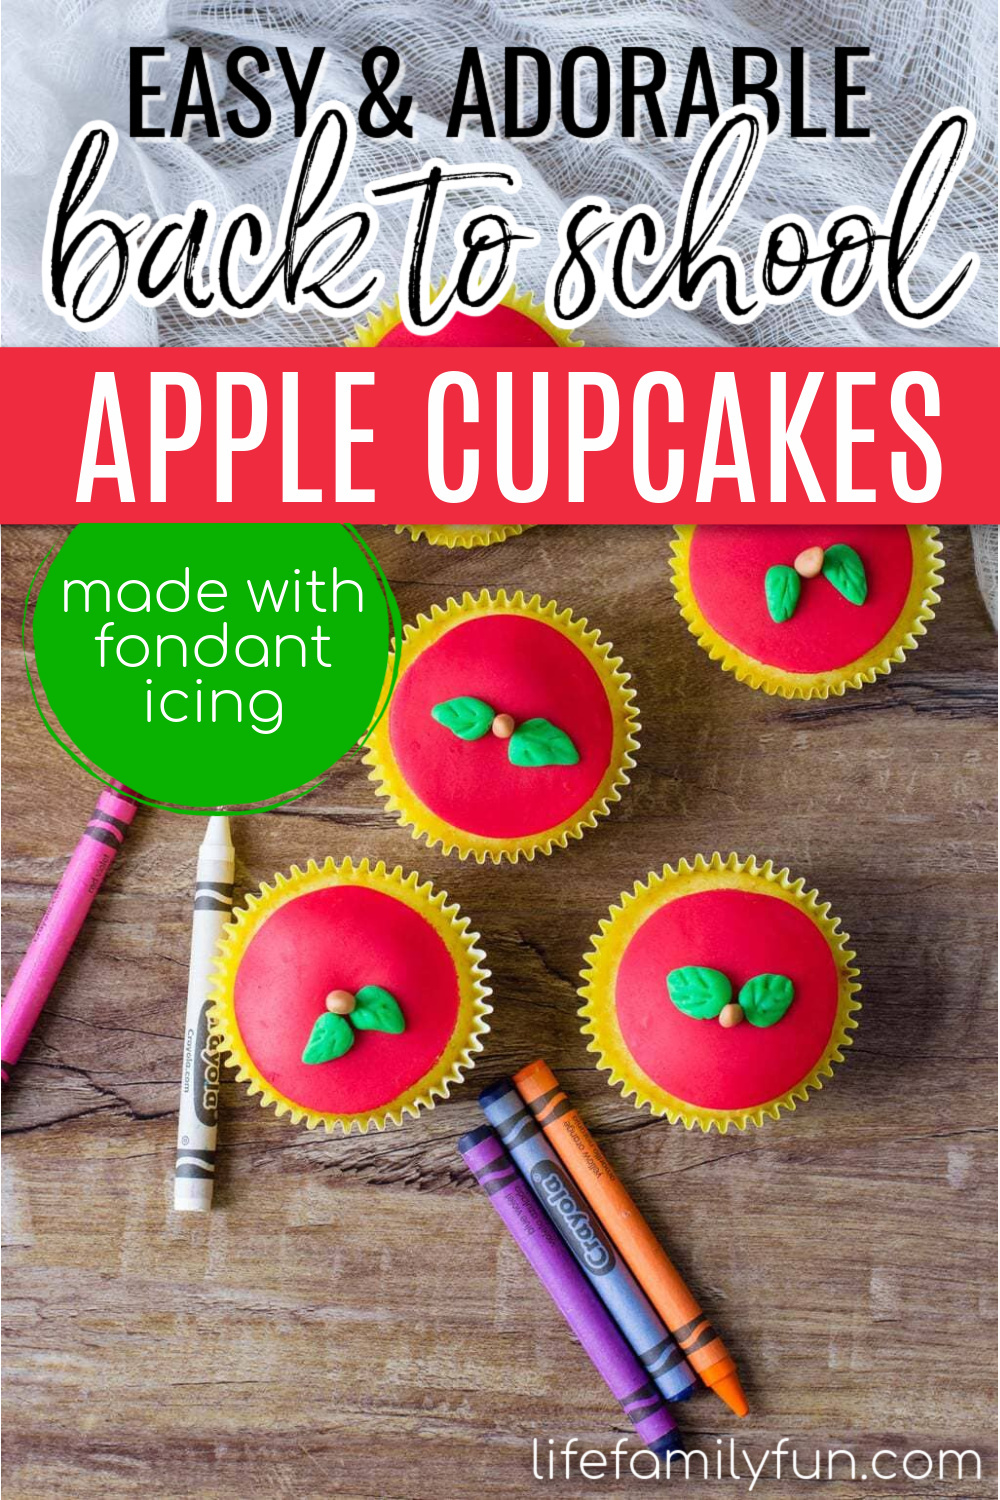 red apple cupcakes on brown board with crayson, pinterest pin